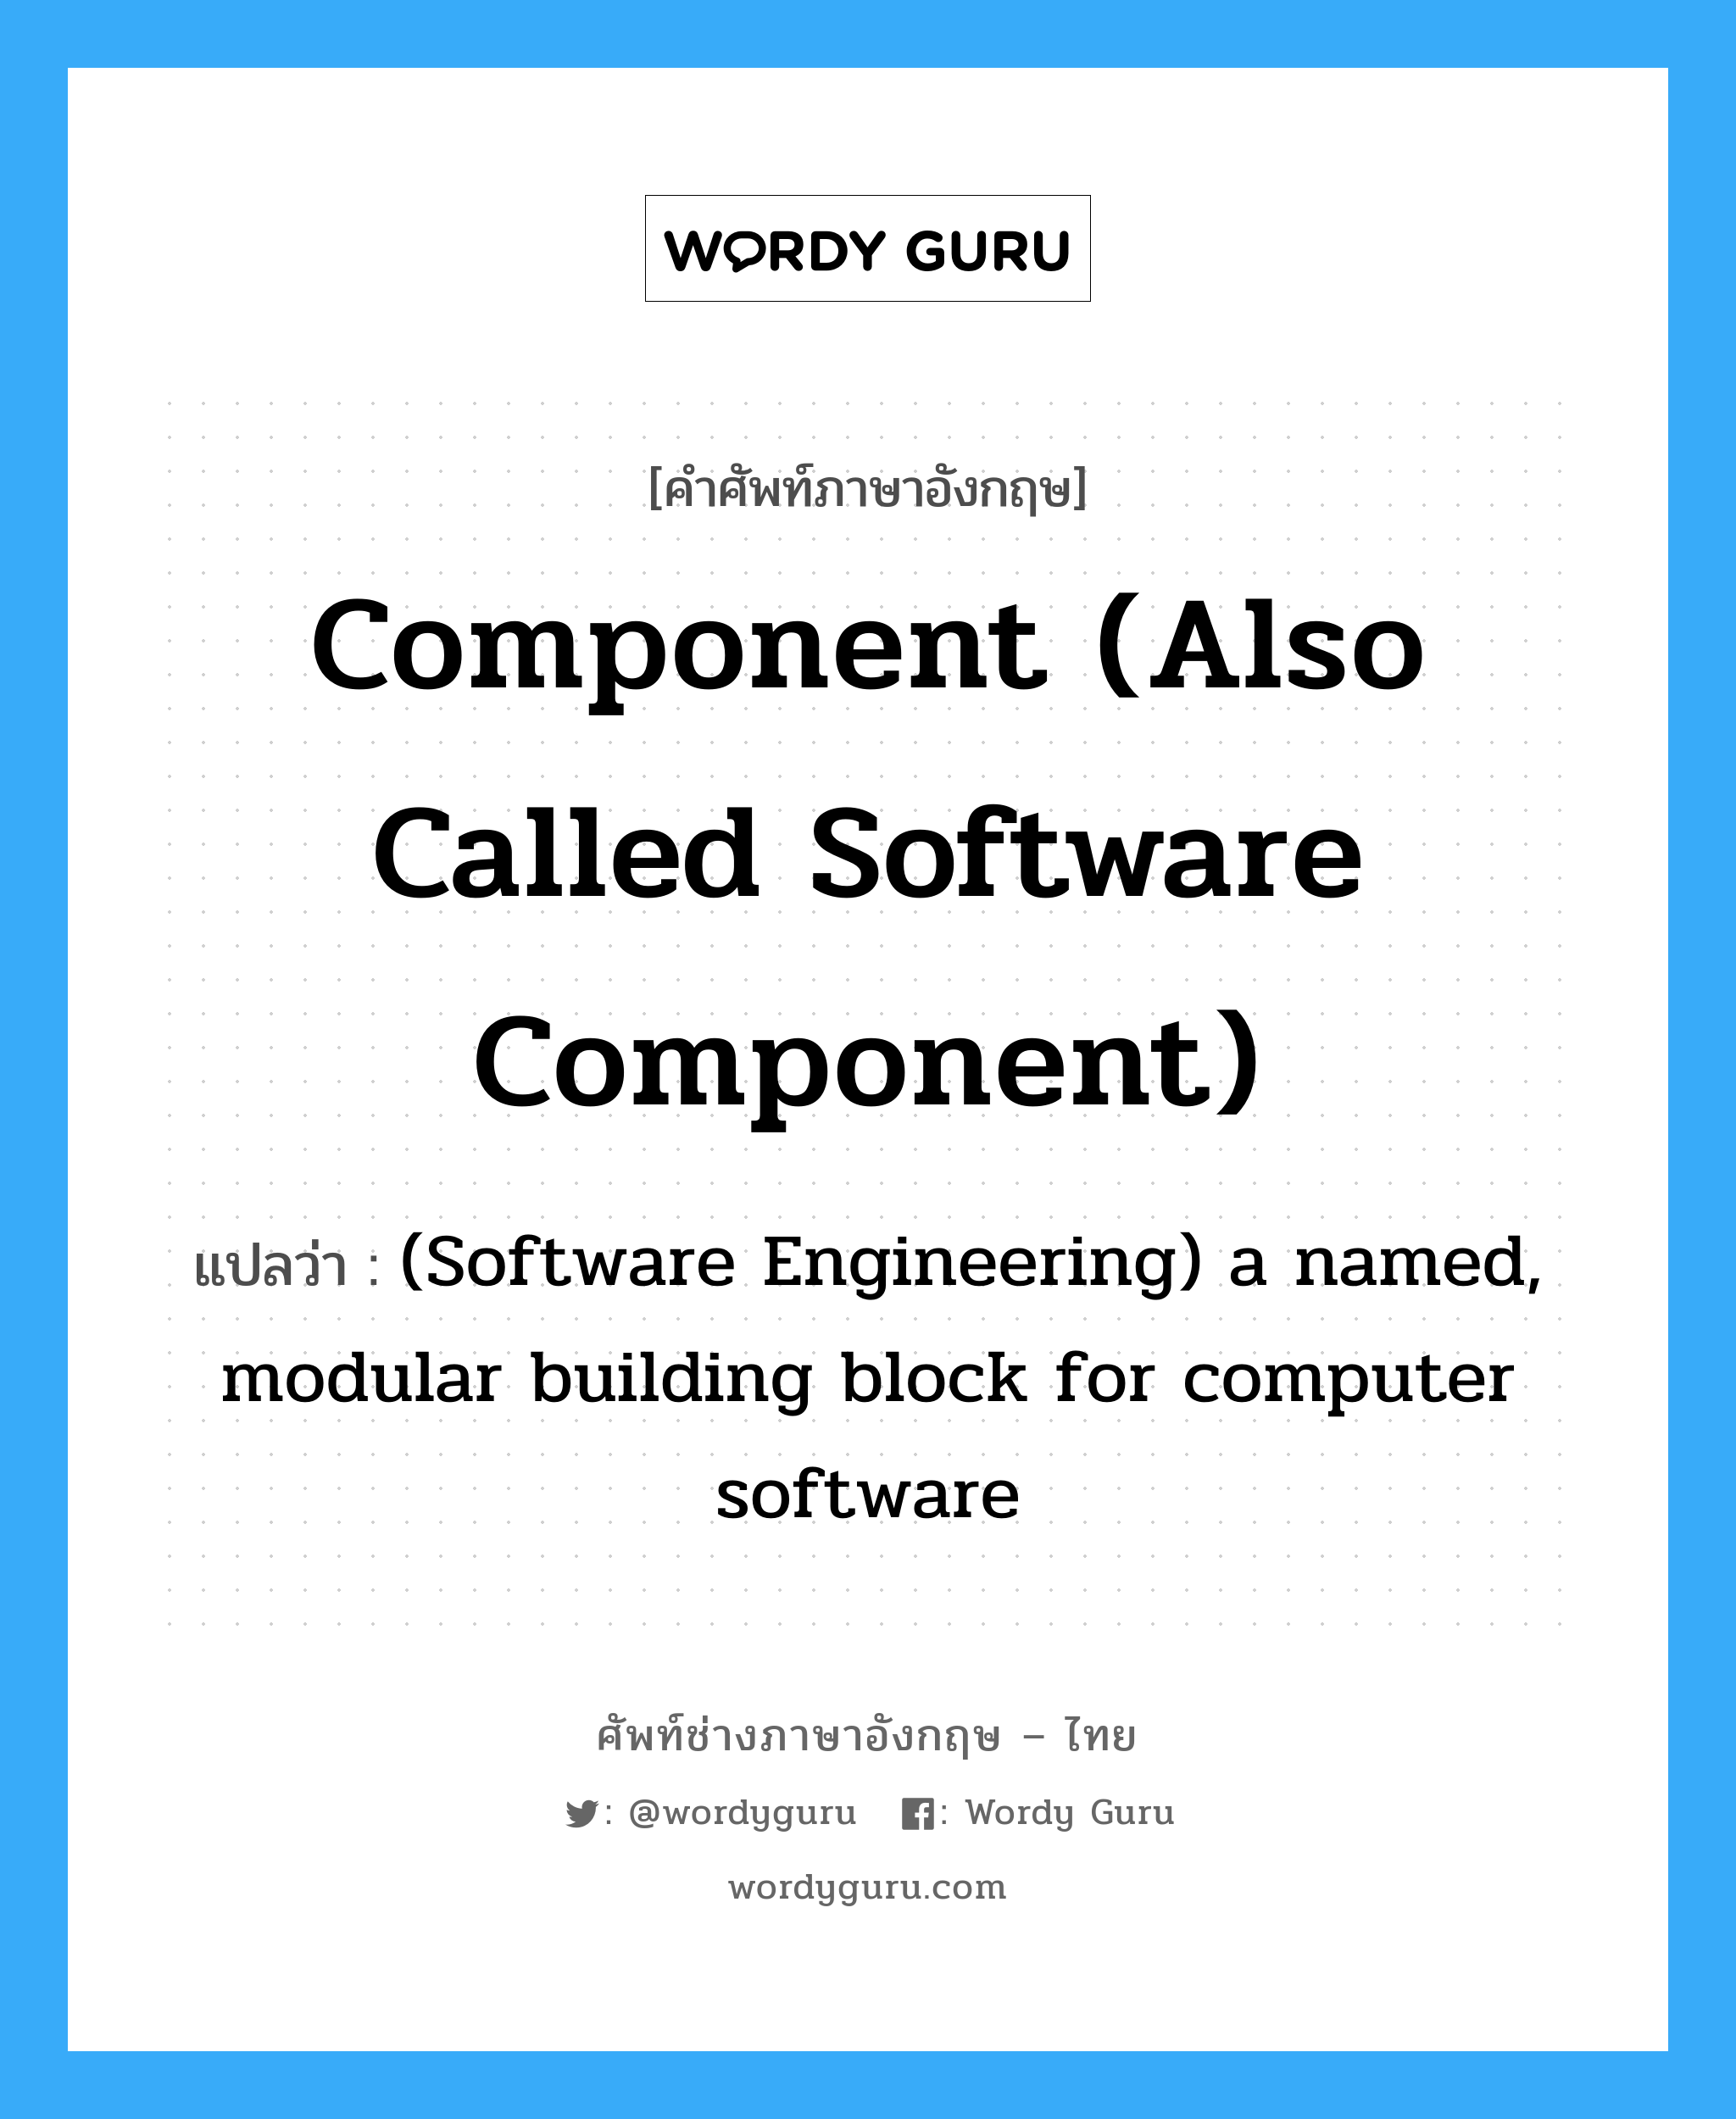 Component (also called Software component) แปลว่า?, คำศัพท์ช่างภาษาอังกฤษ - ไทย Component (also called Software component) คำศัพท์ภาษาอังกฤษ Component (also called Software component) แปลว่า (Software Engineering) a named, modular building block for computer software